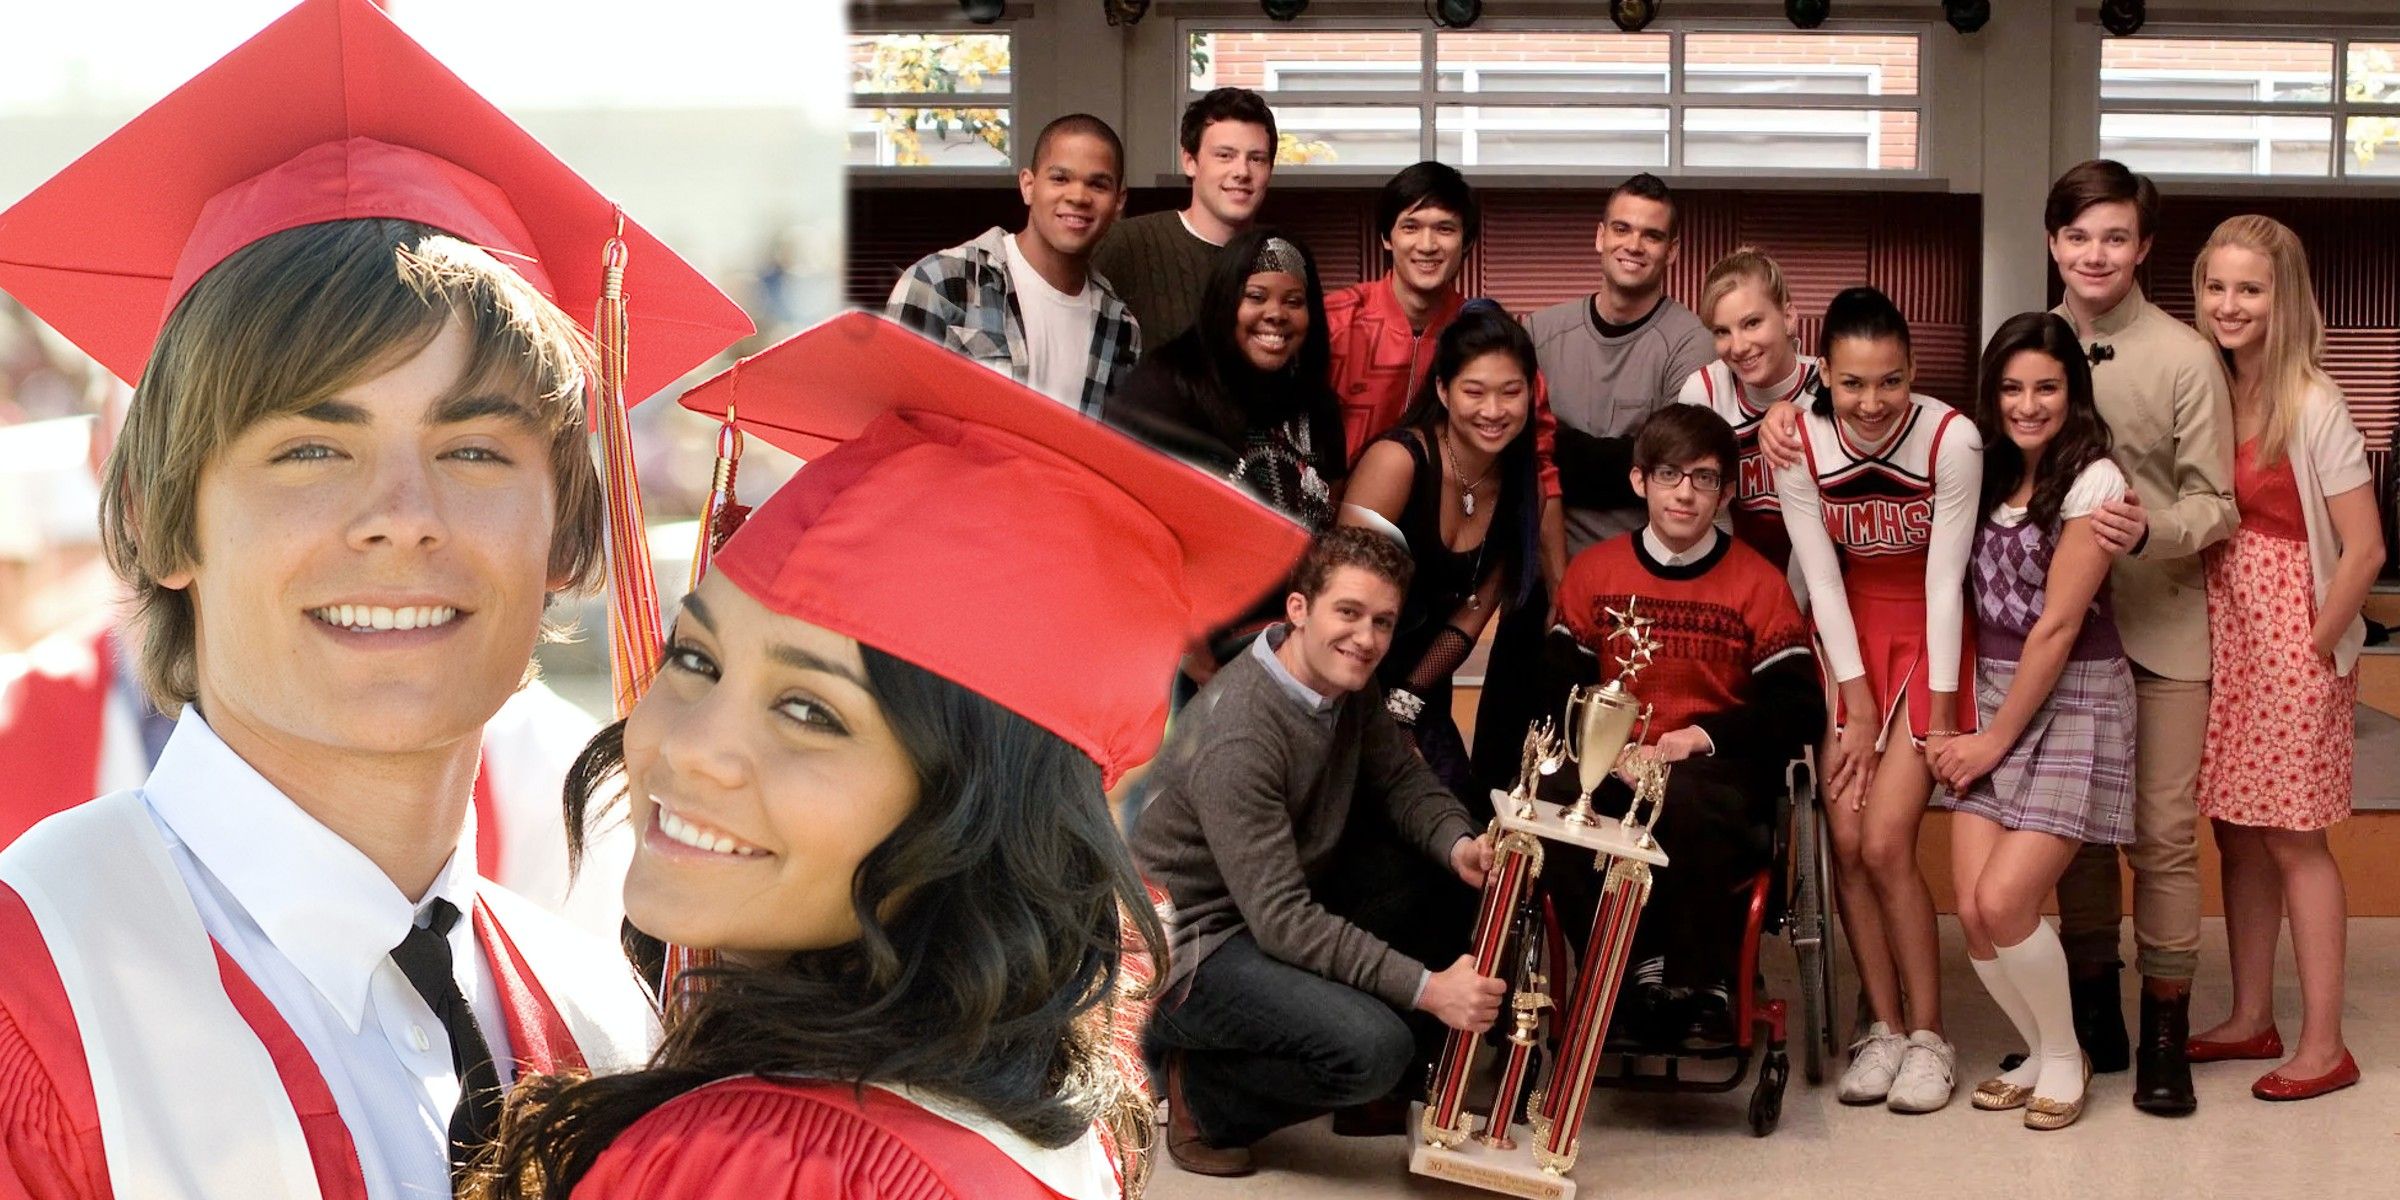 How Glee Was Influenced By High School Musical's Success